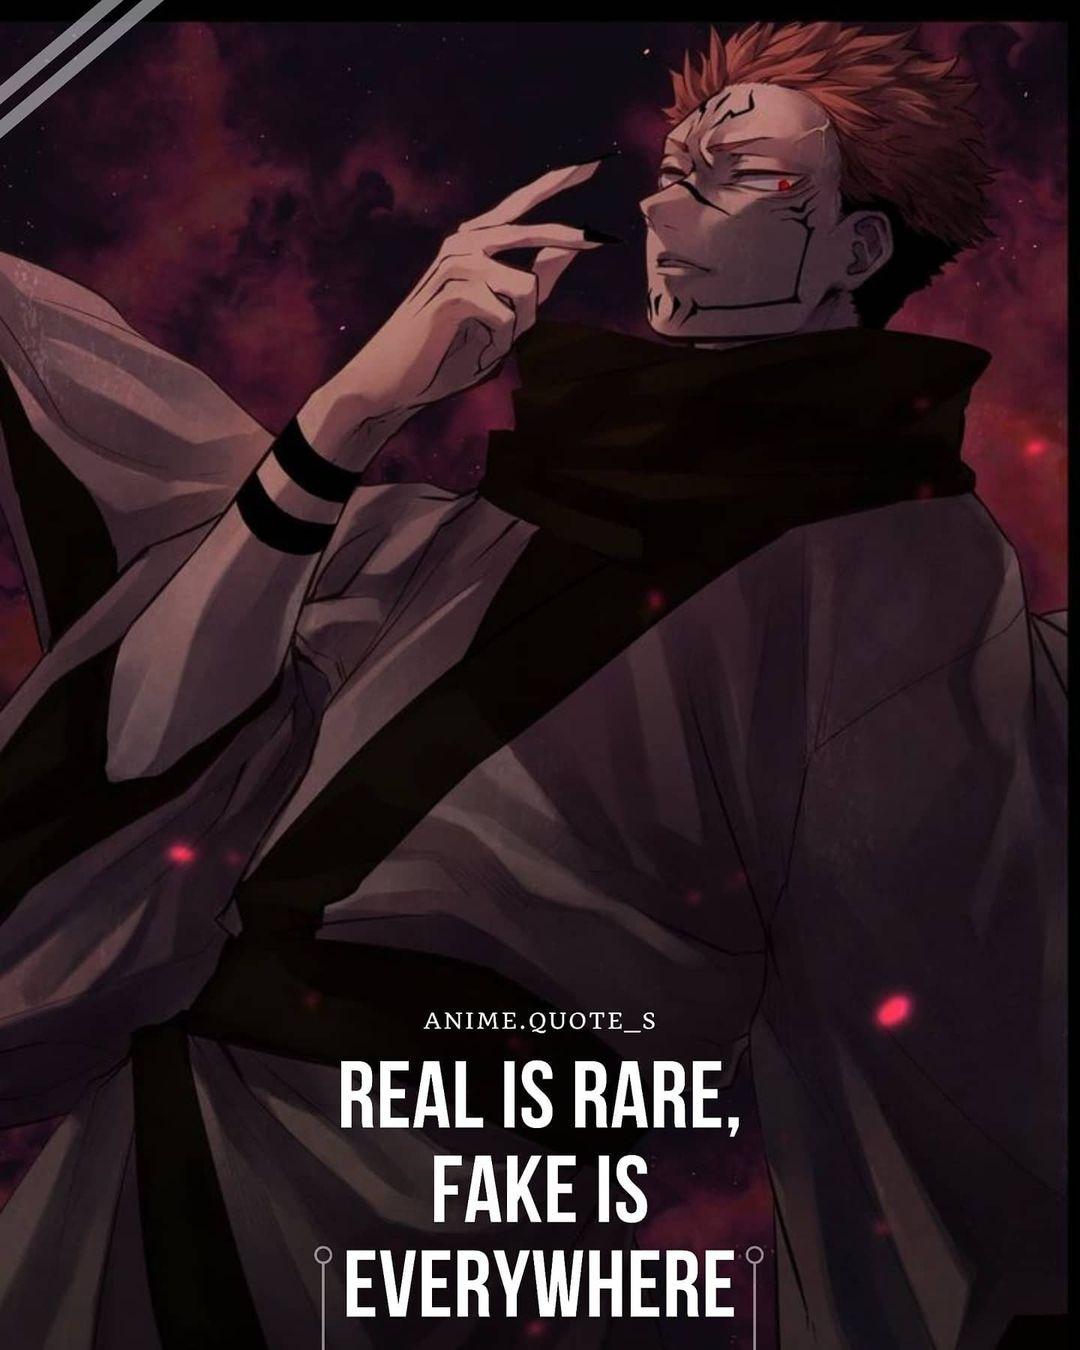 Best 100+ Epic Anime Quotes,
Sad Anime Quotes,
Anime Quotes With Images,
Unique And Life Changing Anime Quotes,
Anime quotes For Instagram,
Anime Quotes About God,
Anime Quotes Funny,

